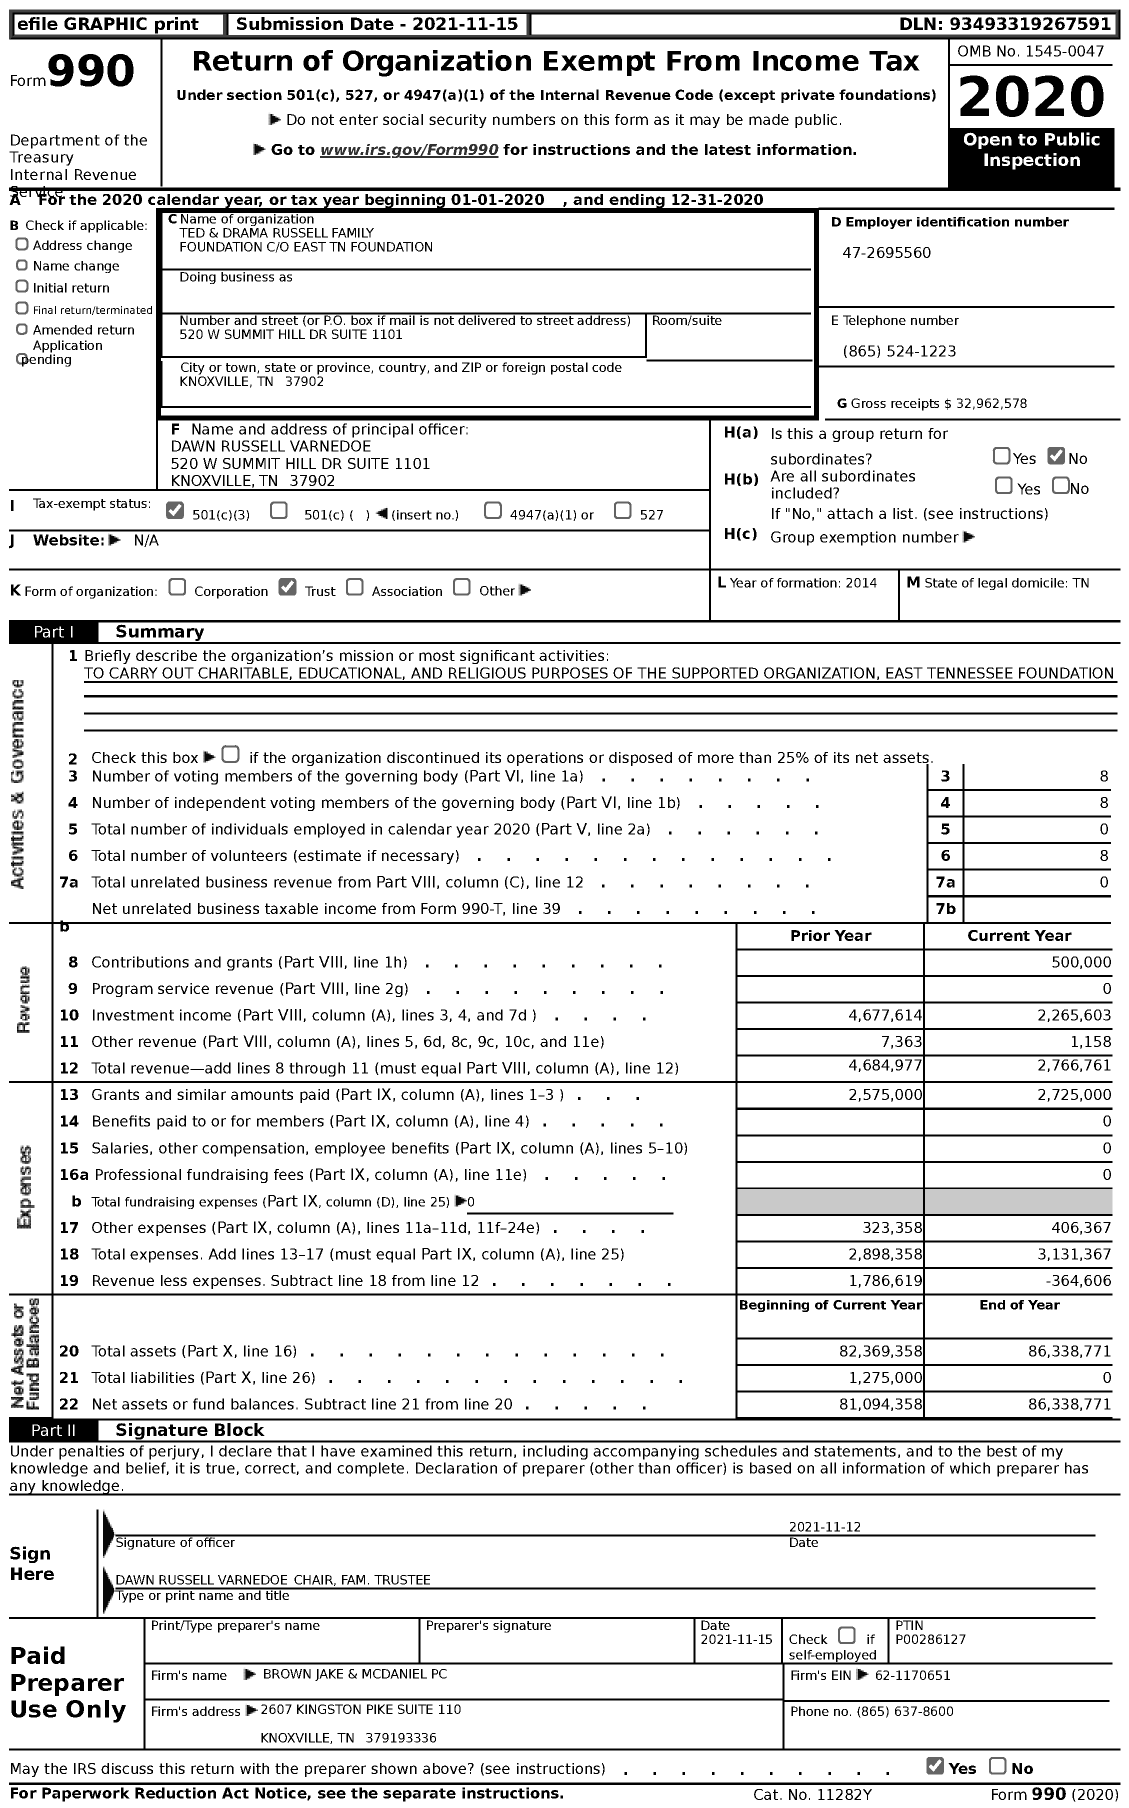 Image of first page of 2020 Form 990 for Ted and Drama Russell Family Foundation